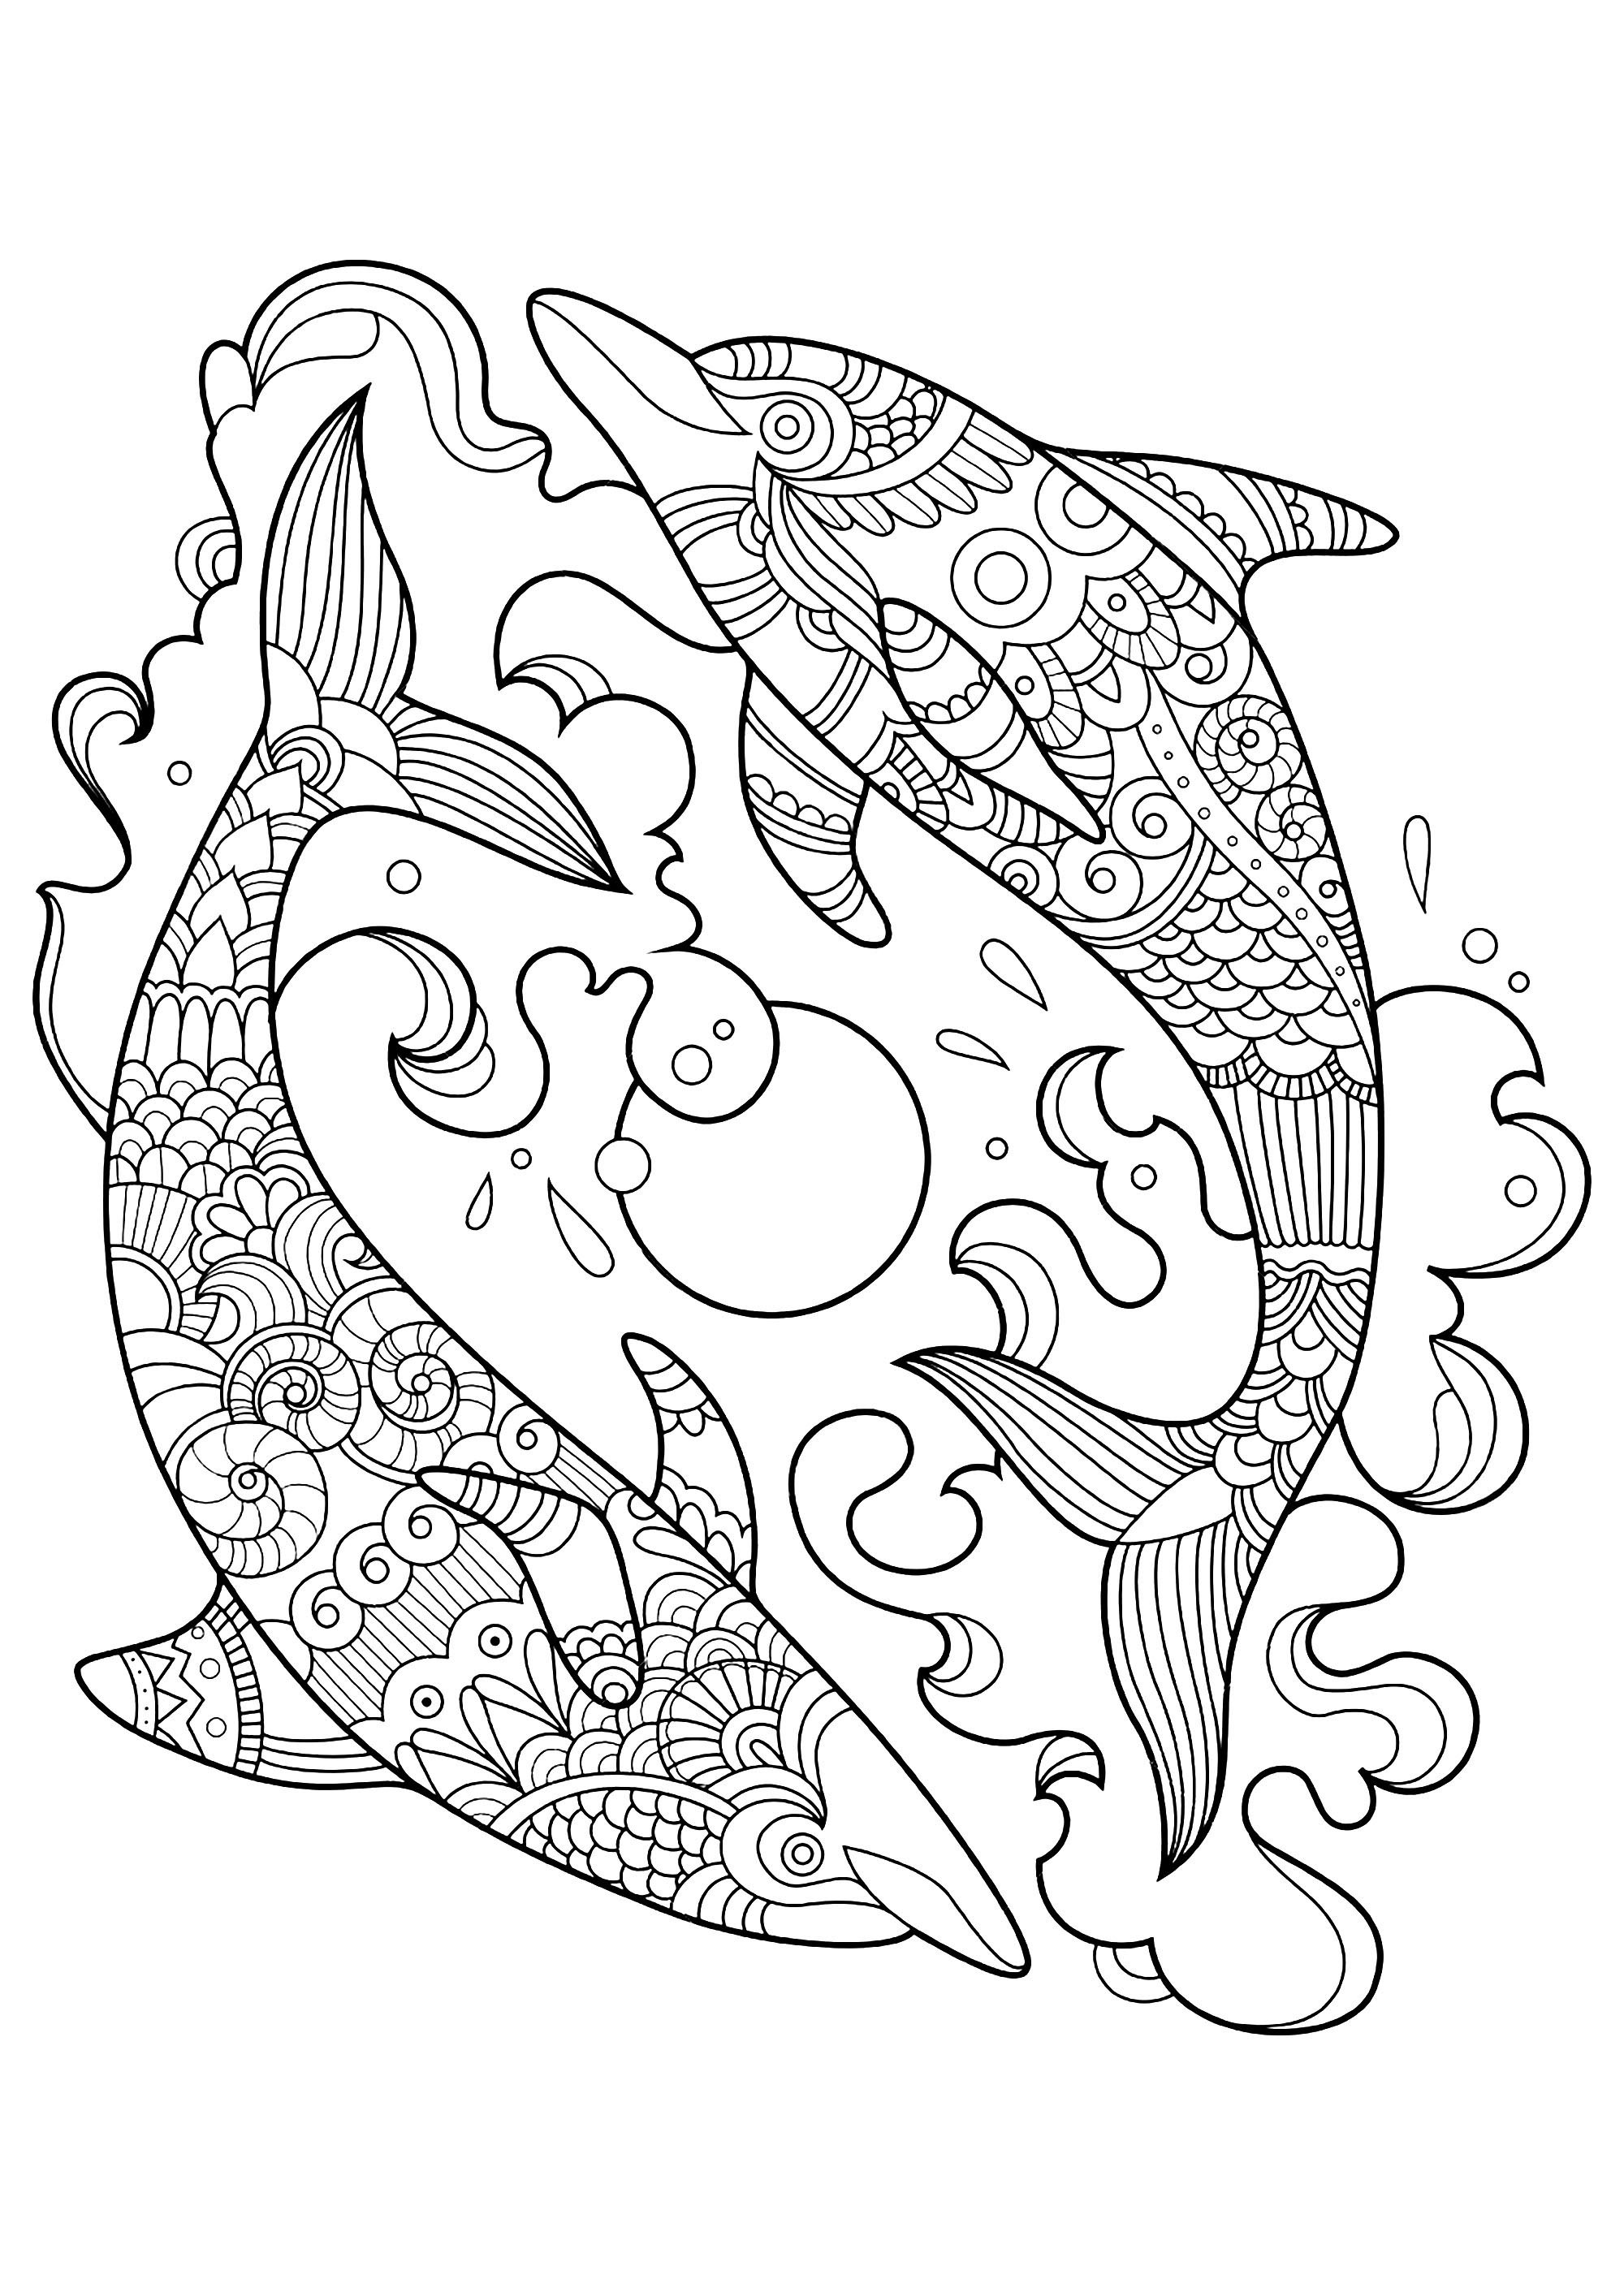 Coloring Book Pages For Kids
 Dolphins to color for children Dolphins Kids Coloring Pages